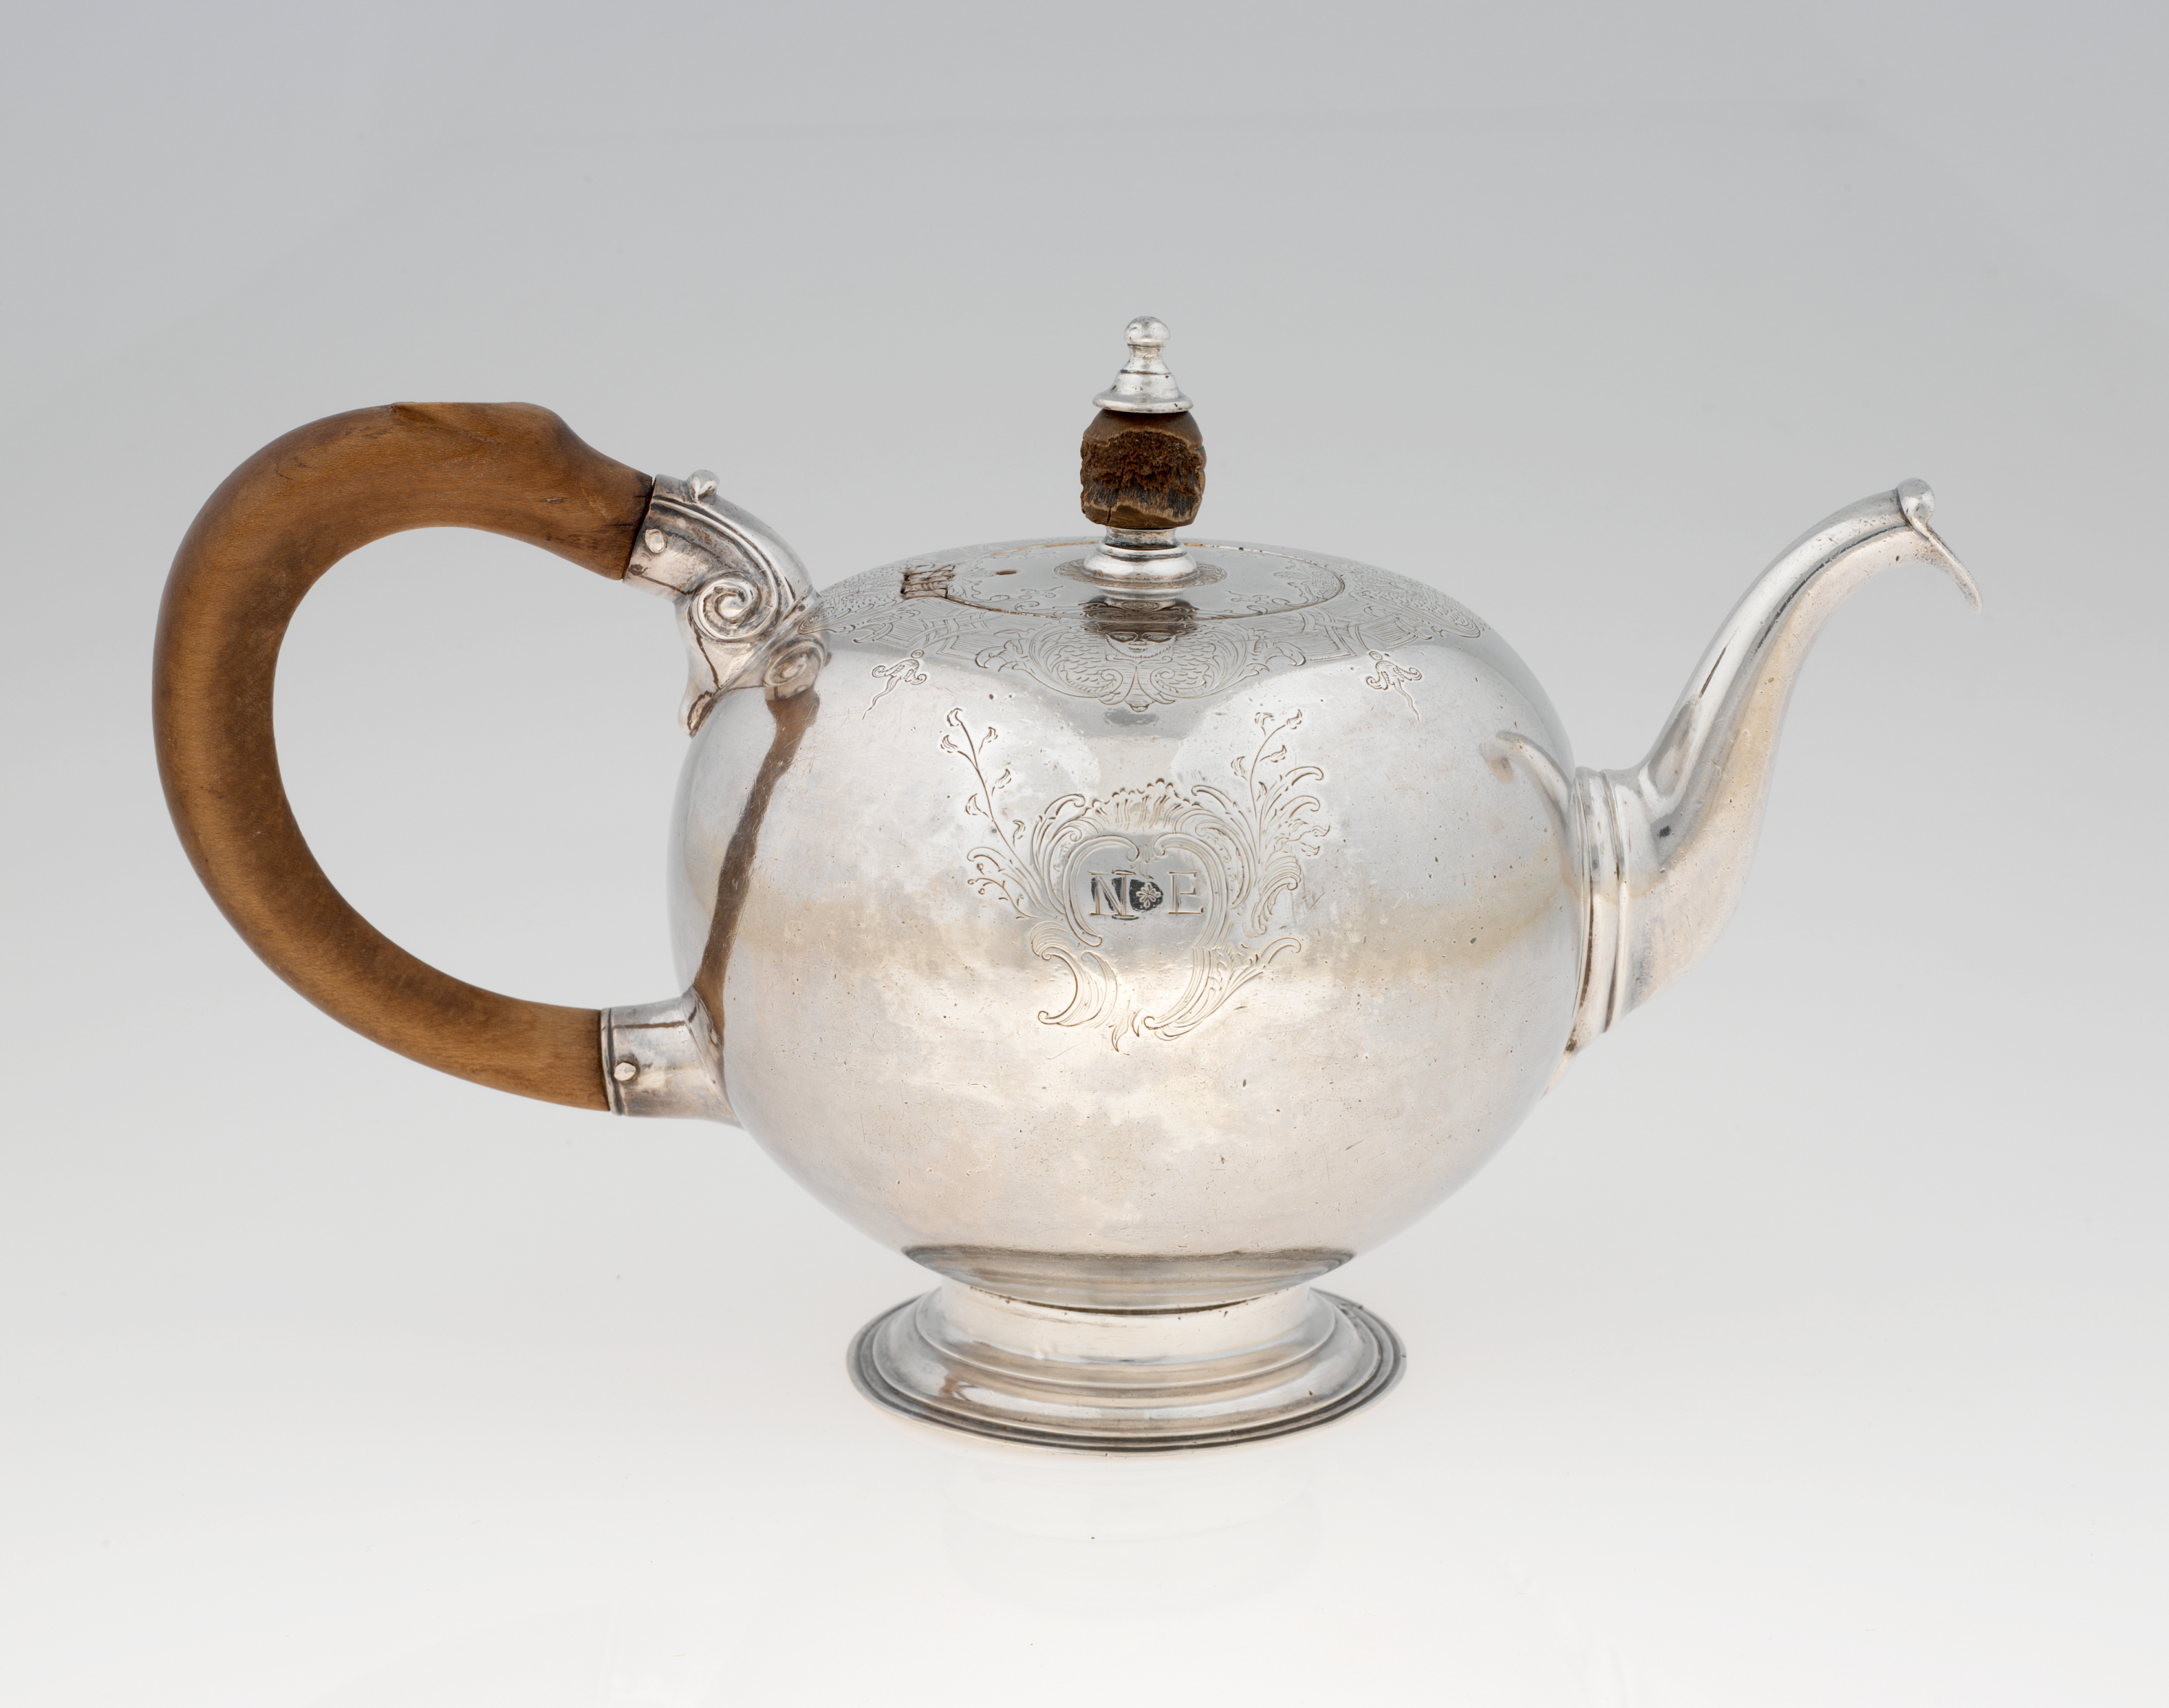 /A%20bulbous%20silver%20teapot%20with%20a%20long%20curved%20spout%2C%20and%20foot%2C%20wooden%20finial%20and%20handle%20connected%20with%20decorative%20silver%20pieces.%20There%20are%20delicate%20engraved%20marks%20on%20the%20body%20and%20lid.